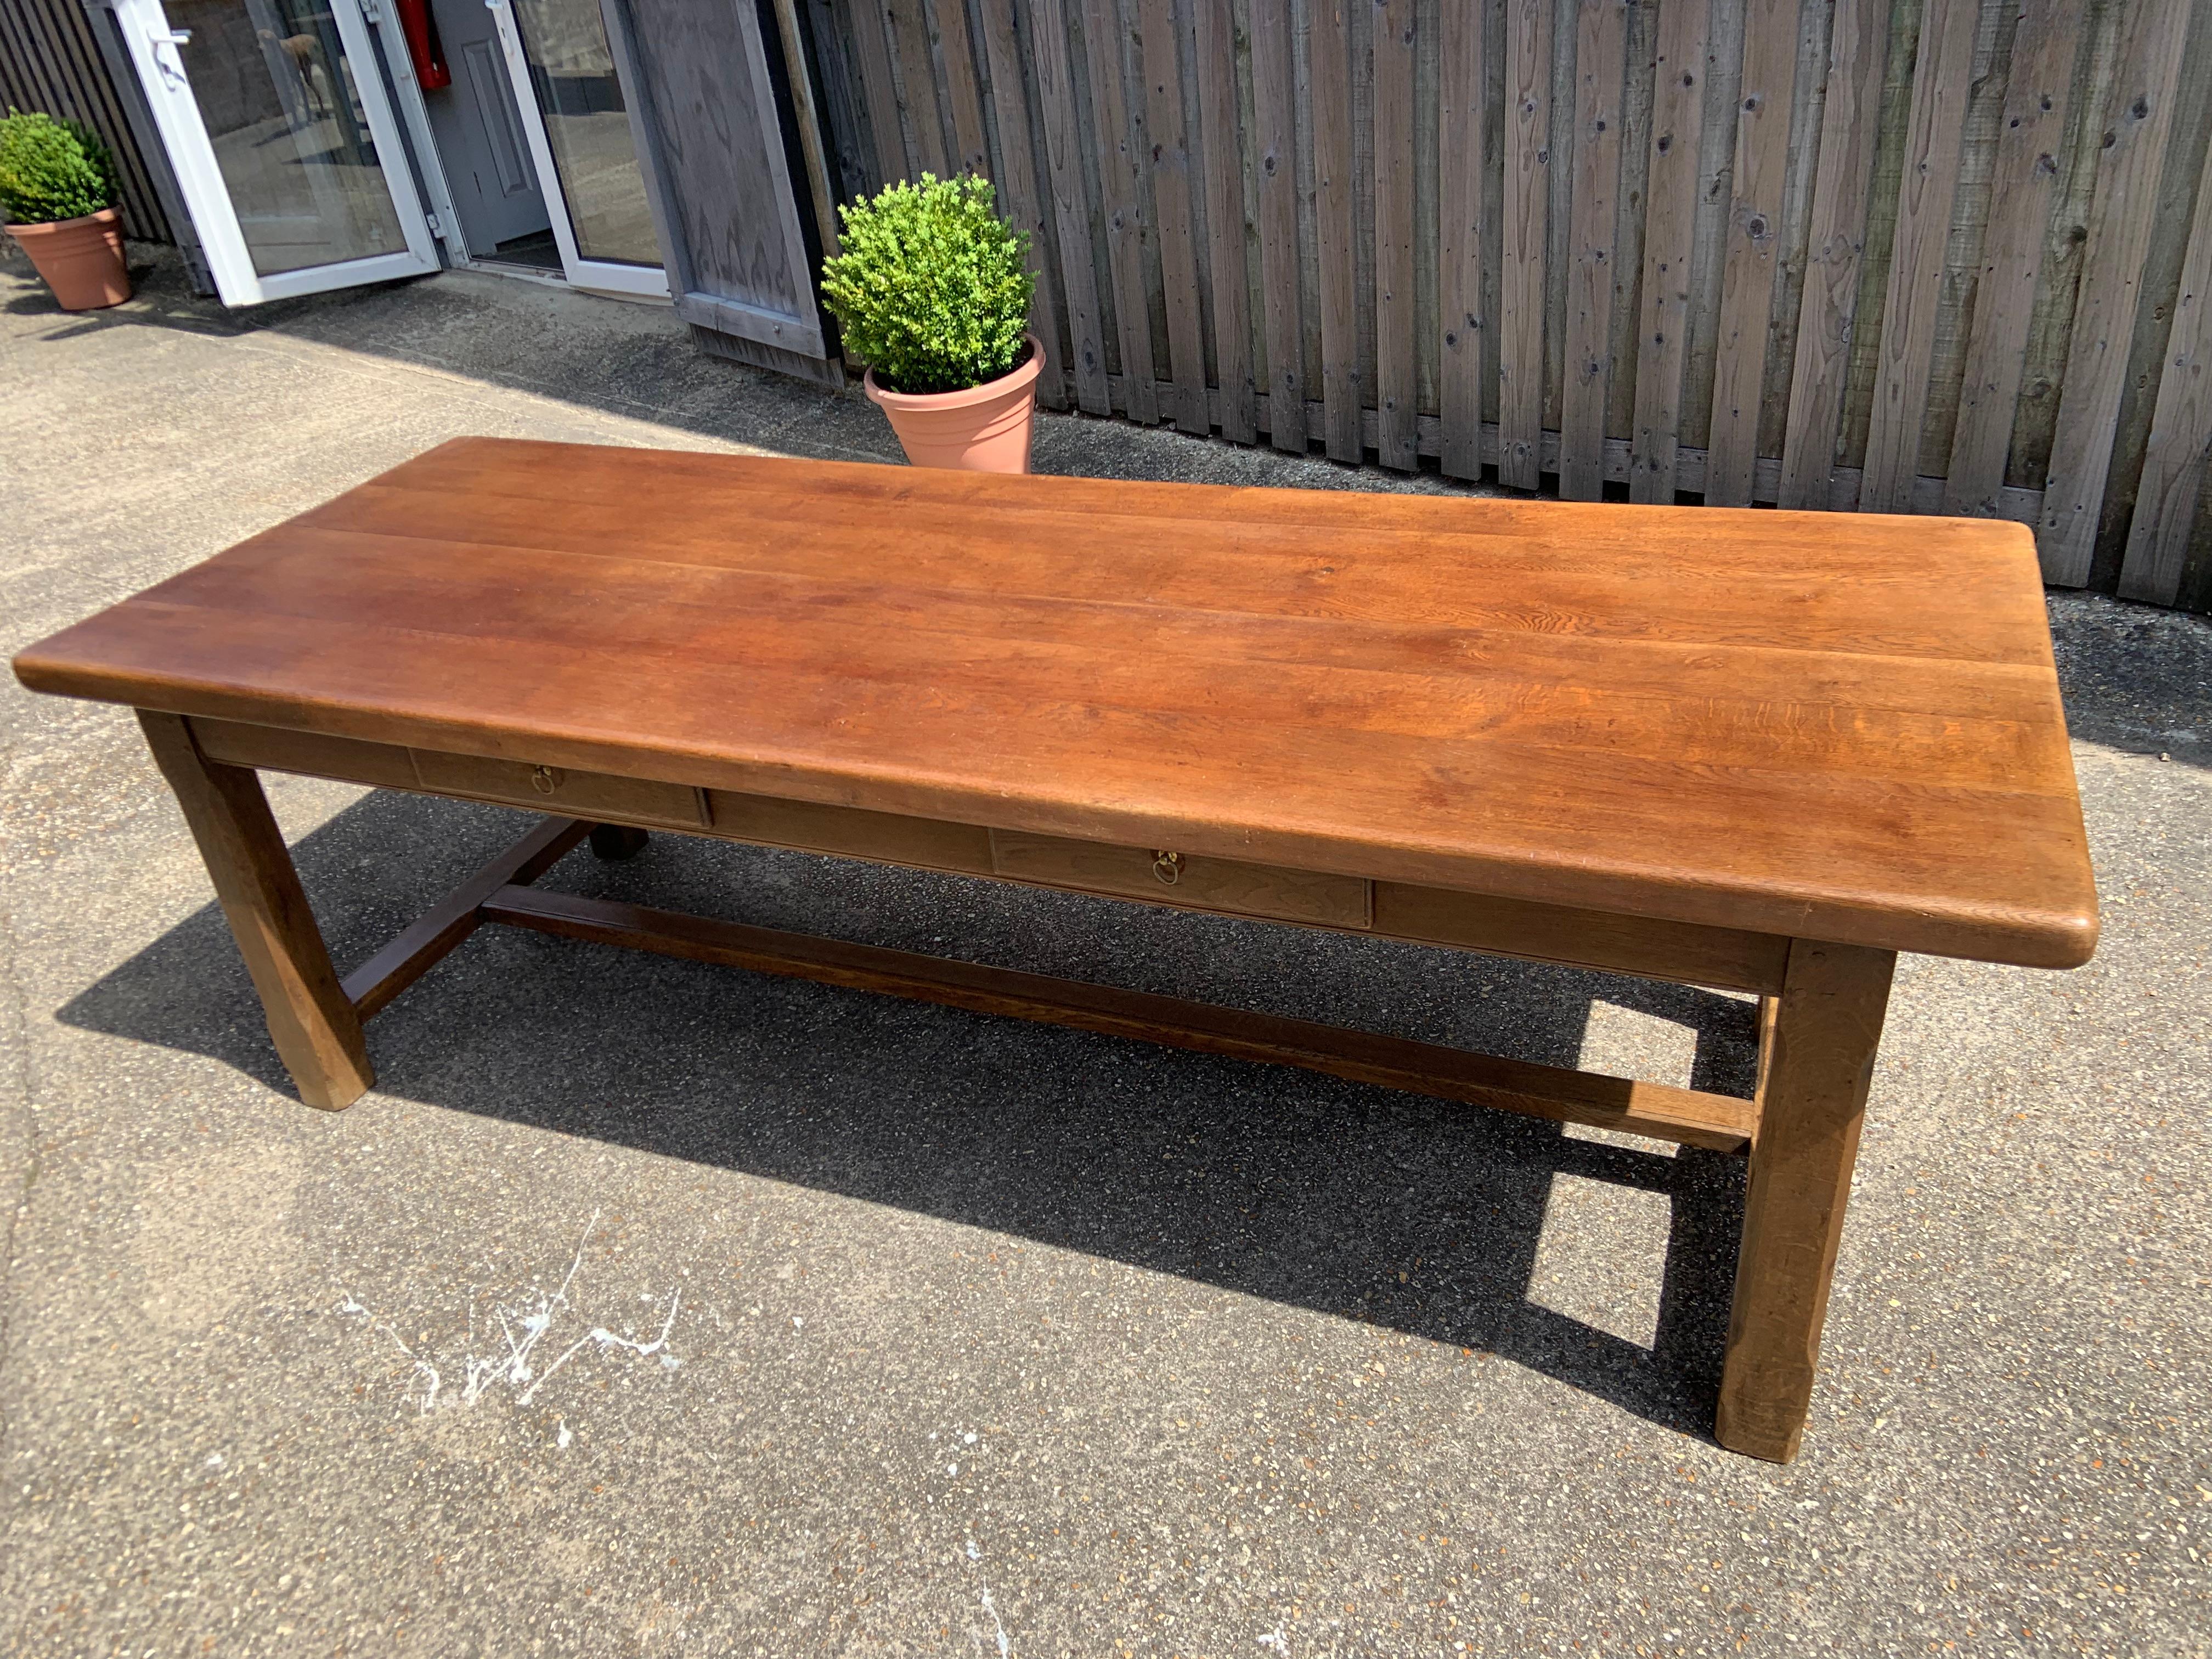 Early 20th century oak farmhouse table with two side drawers. Very large farmhouse table with wide top, good colour and very sturdy original base. The legs are very thick and sturdy again making this a great everyday table for a living kitchen and